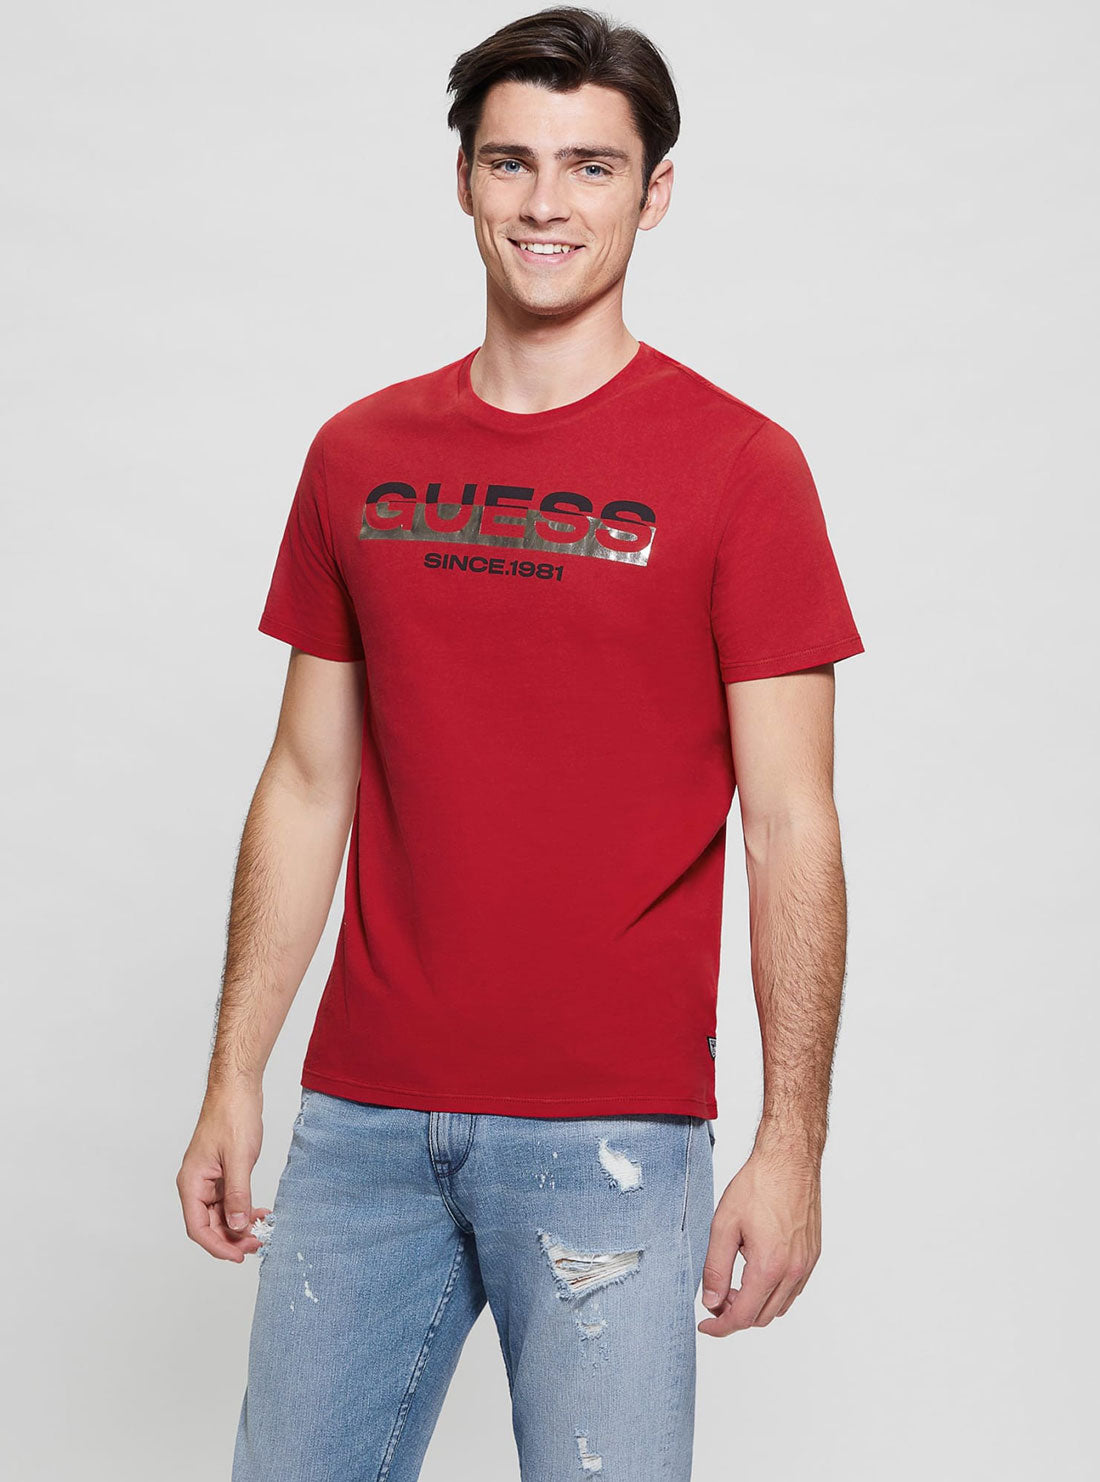 GUESS Red Foil Logo Short Sleeve T-Shirt front view